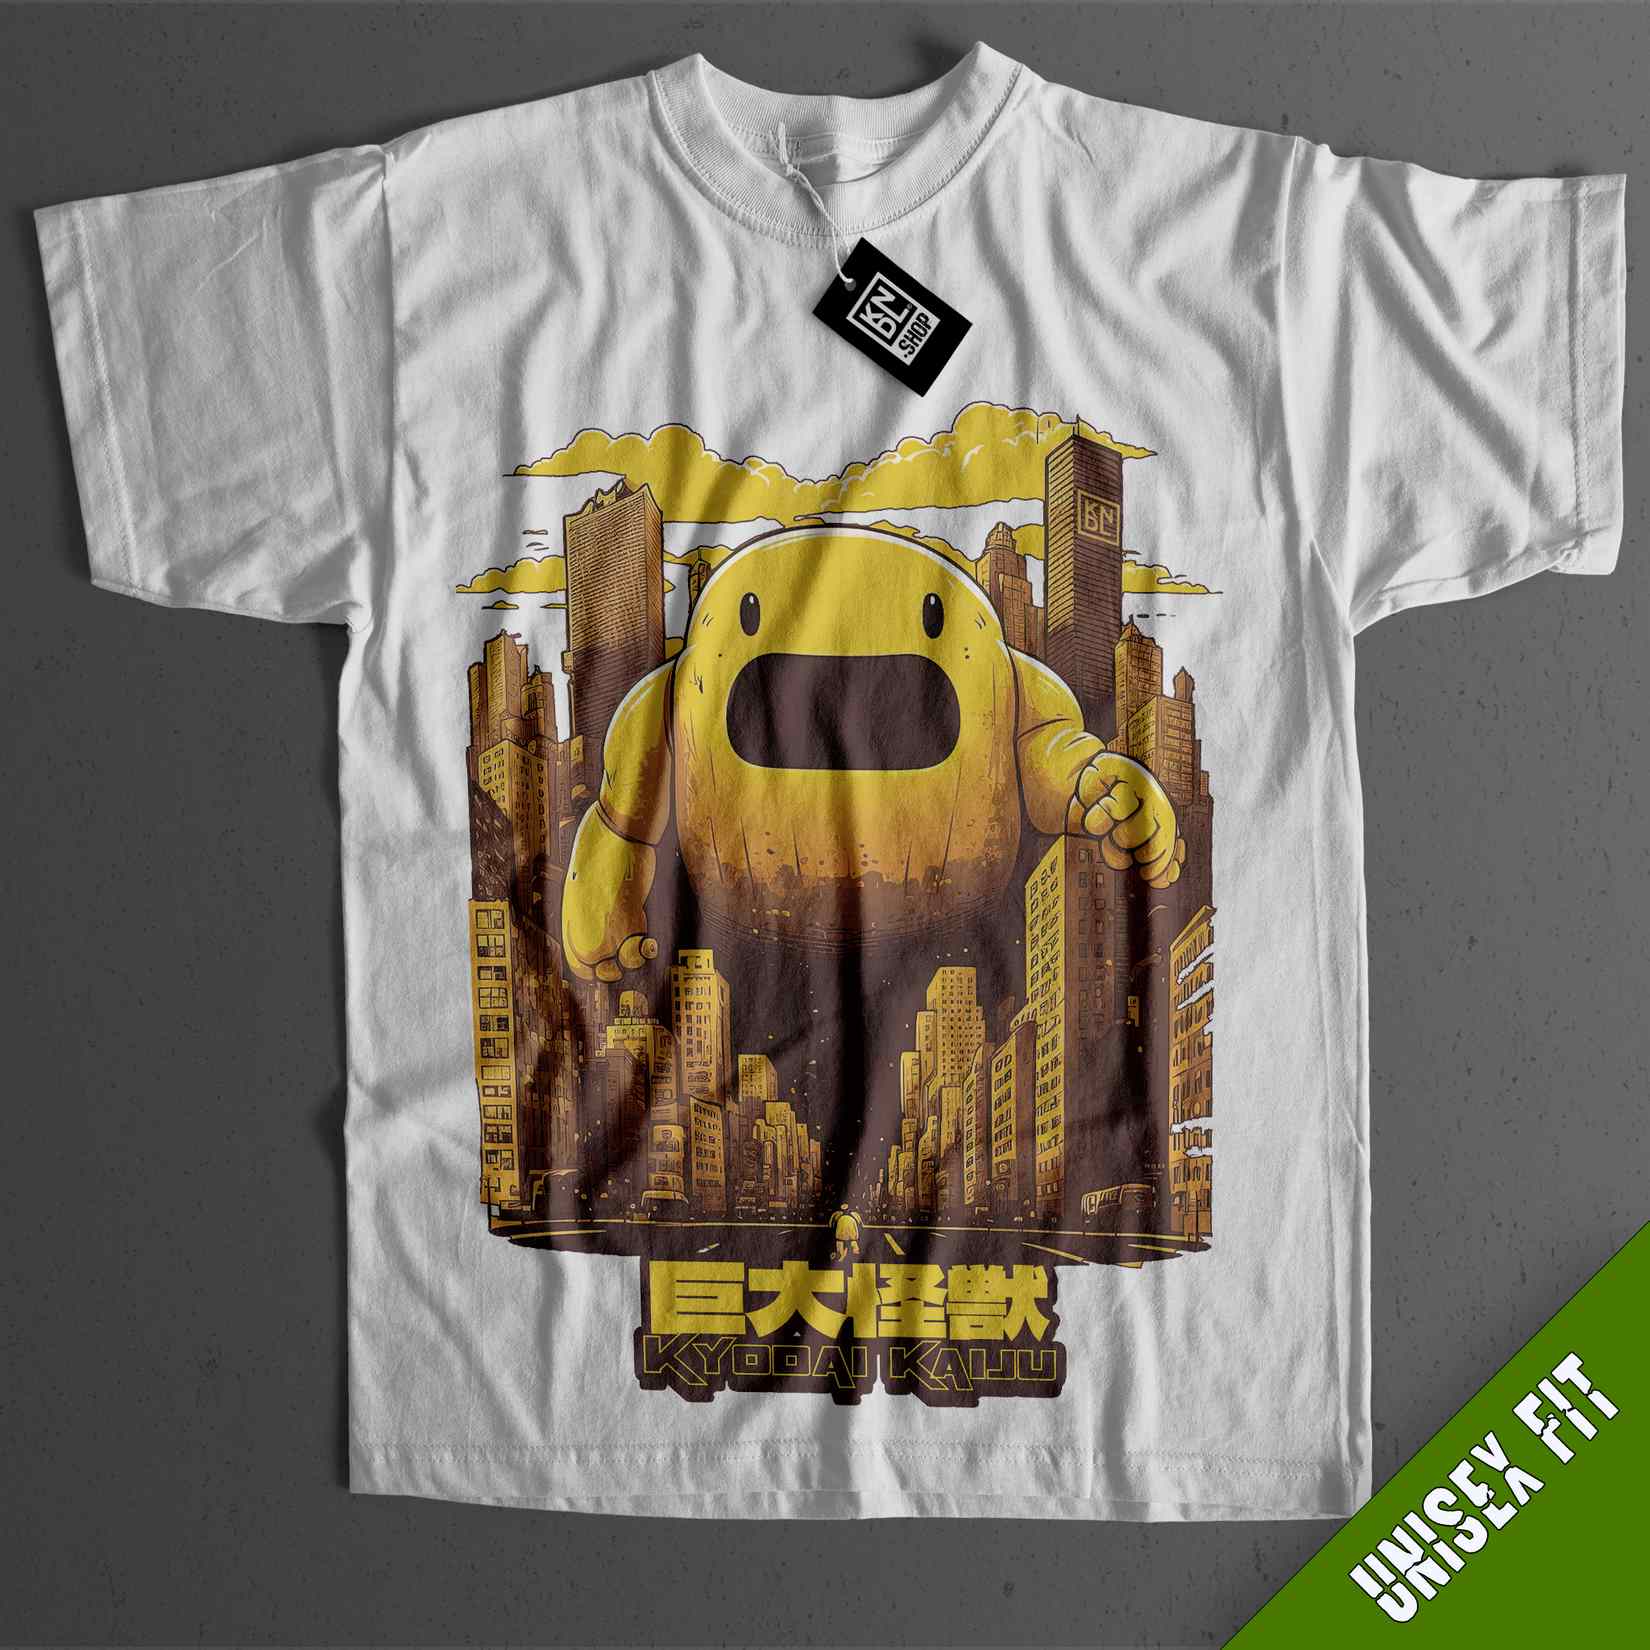 a t - shirt with a picture of a yellow monster on it